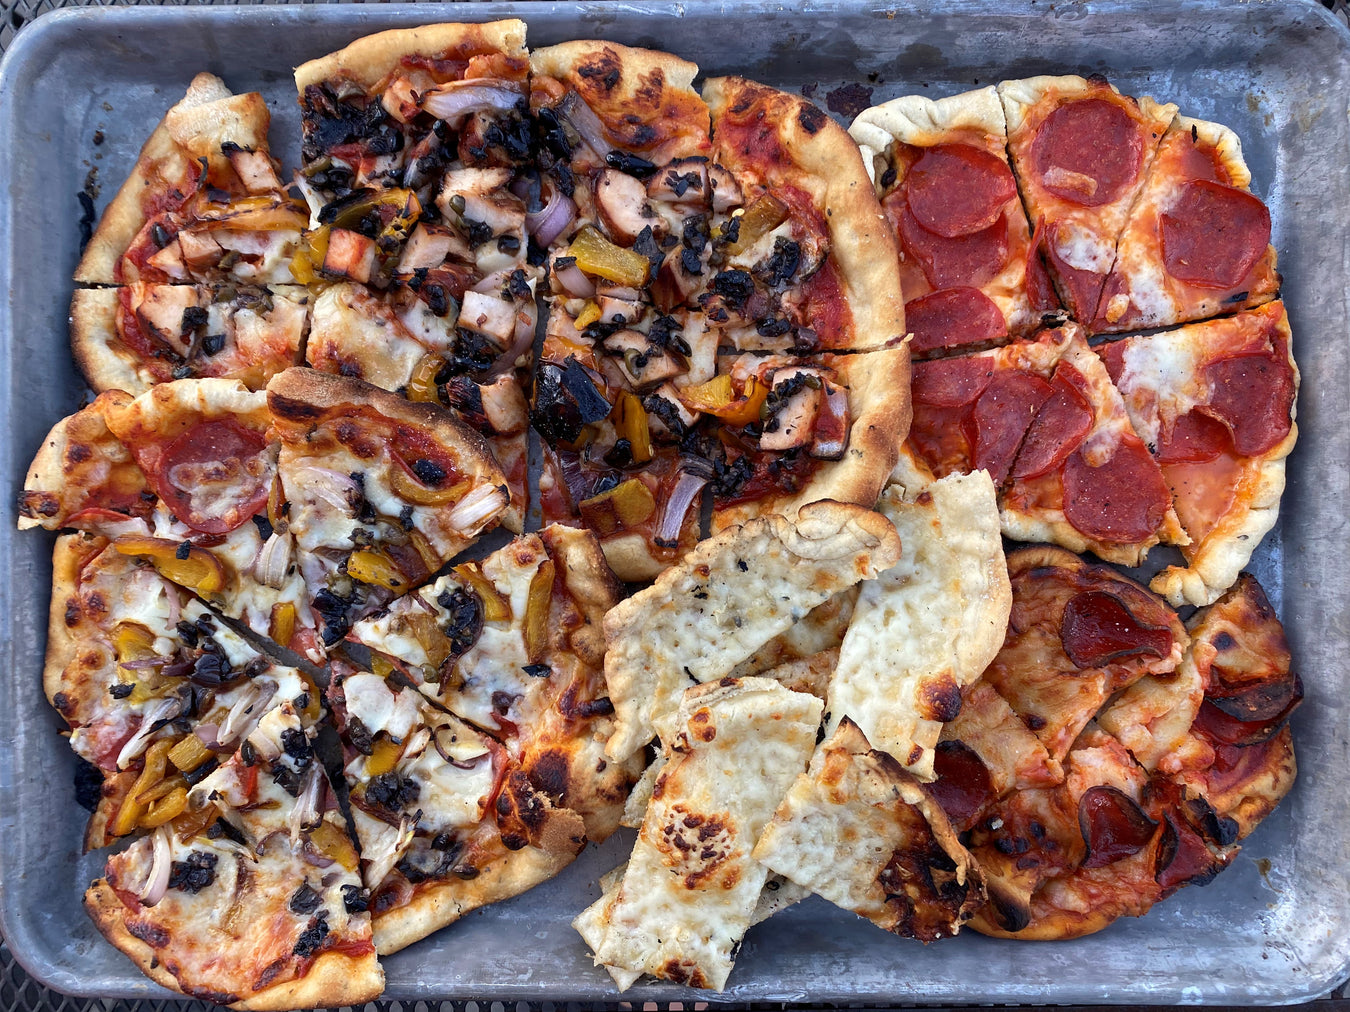 The Kansas City BBQ Store features everything you need to make amazing pizzas, including outdoor pizza ovens.